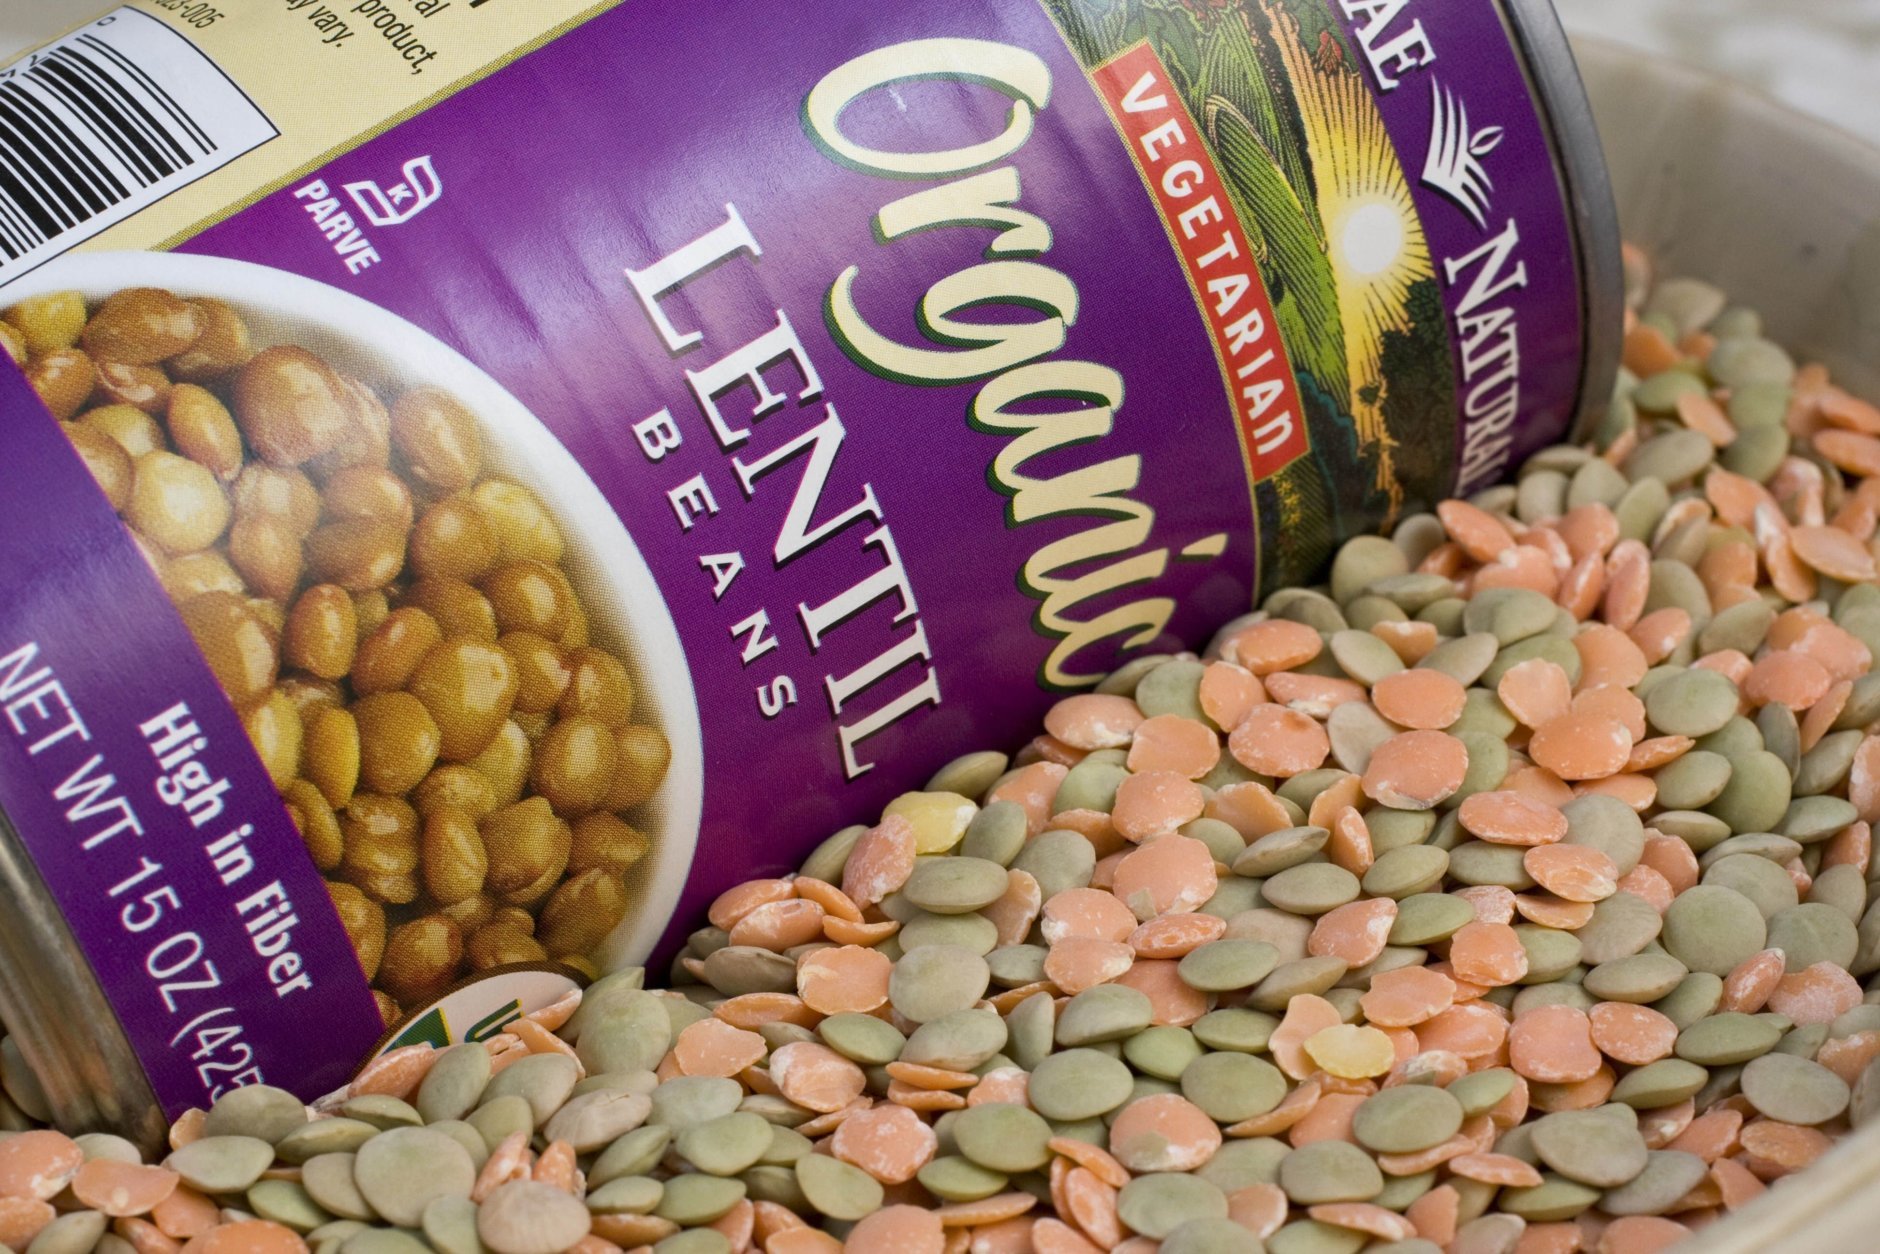 With lentils finding their way into more and more recipes in major food magazines producers of the legume are working to capitalize on this interest by getting consumers to use them in different and less traditional ways. (AP Photo/Larry Crowe)